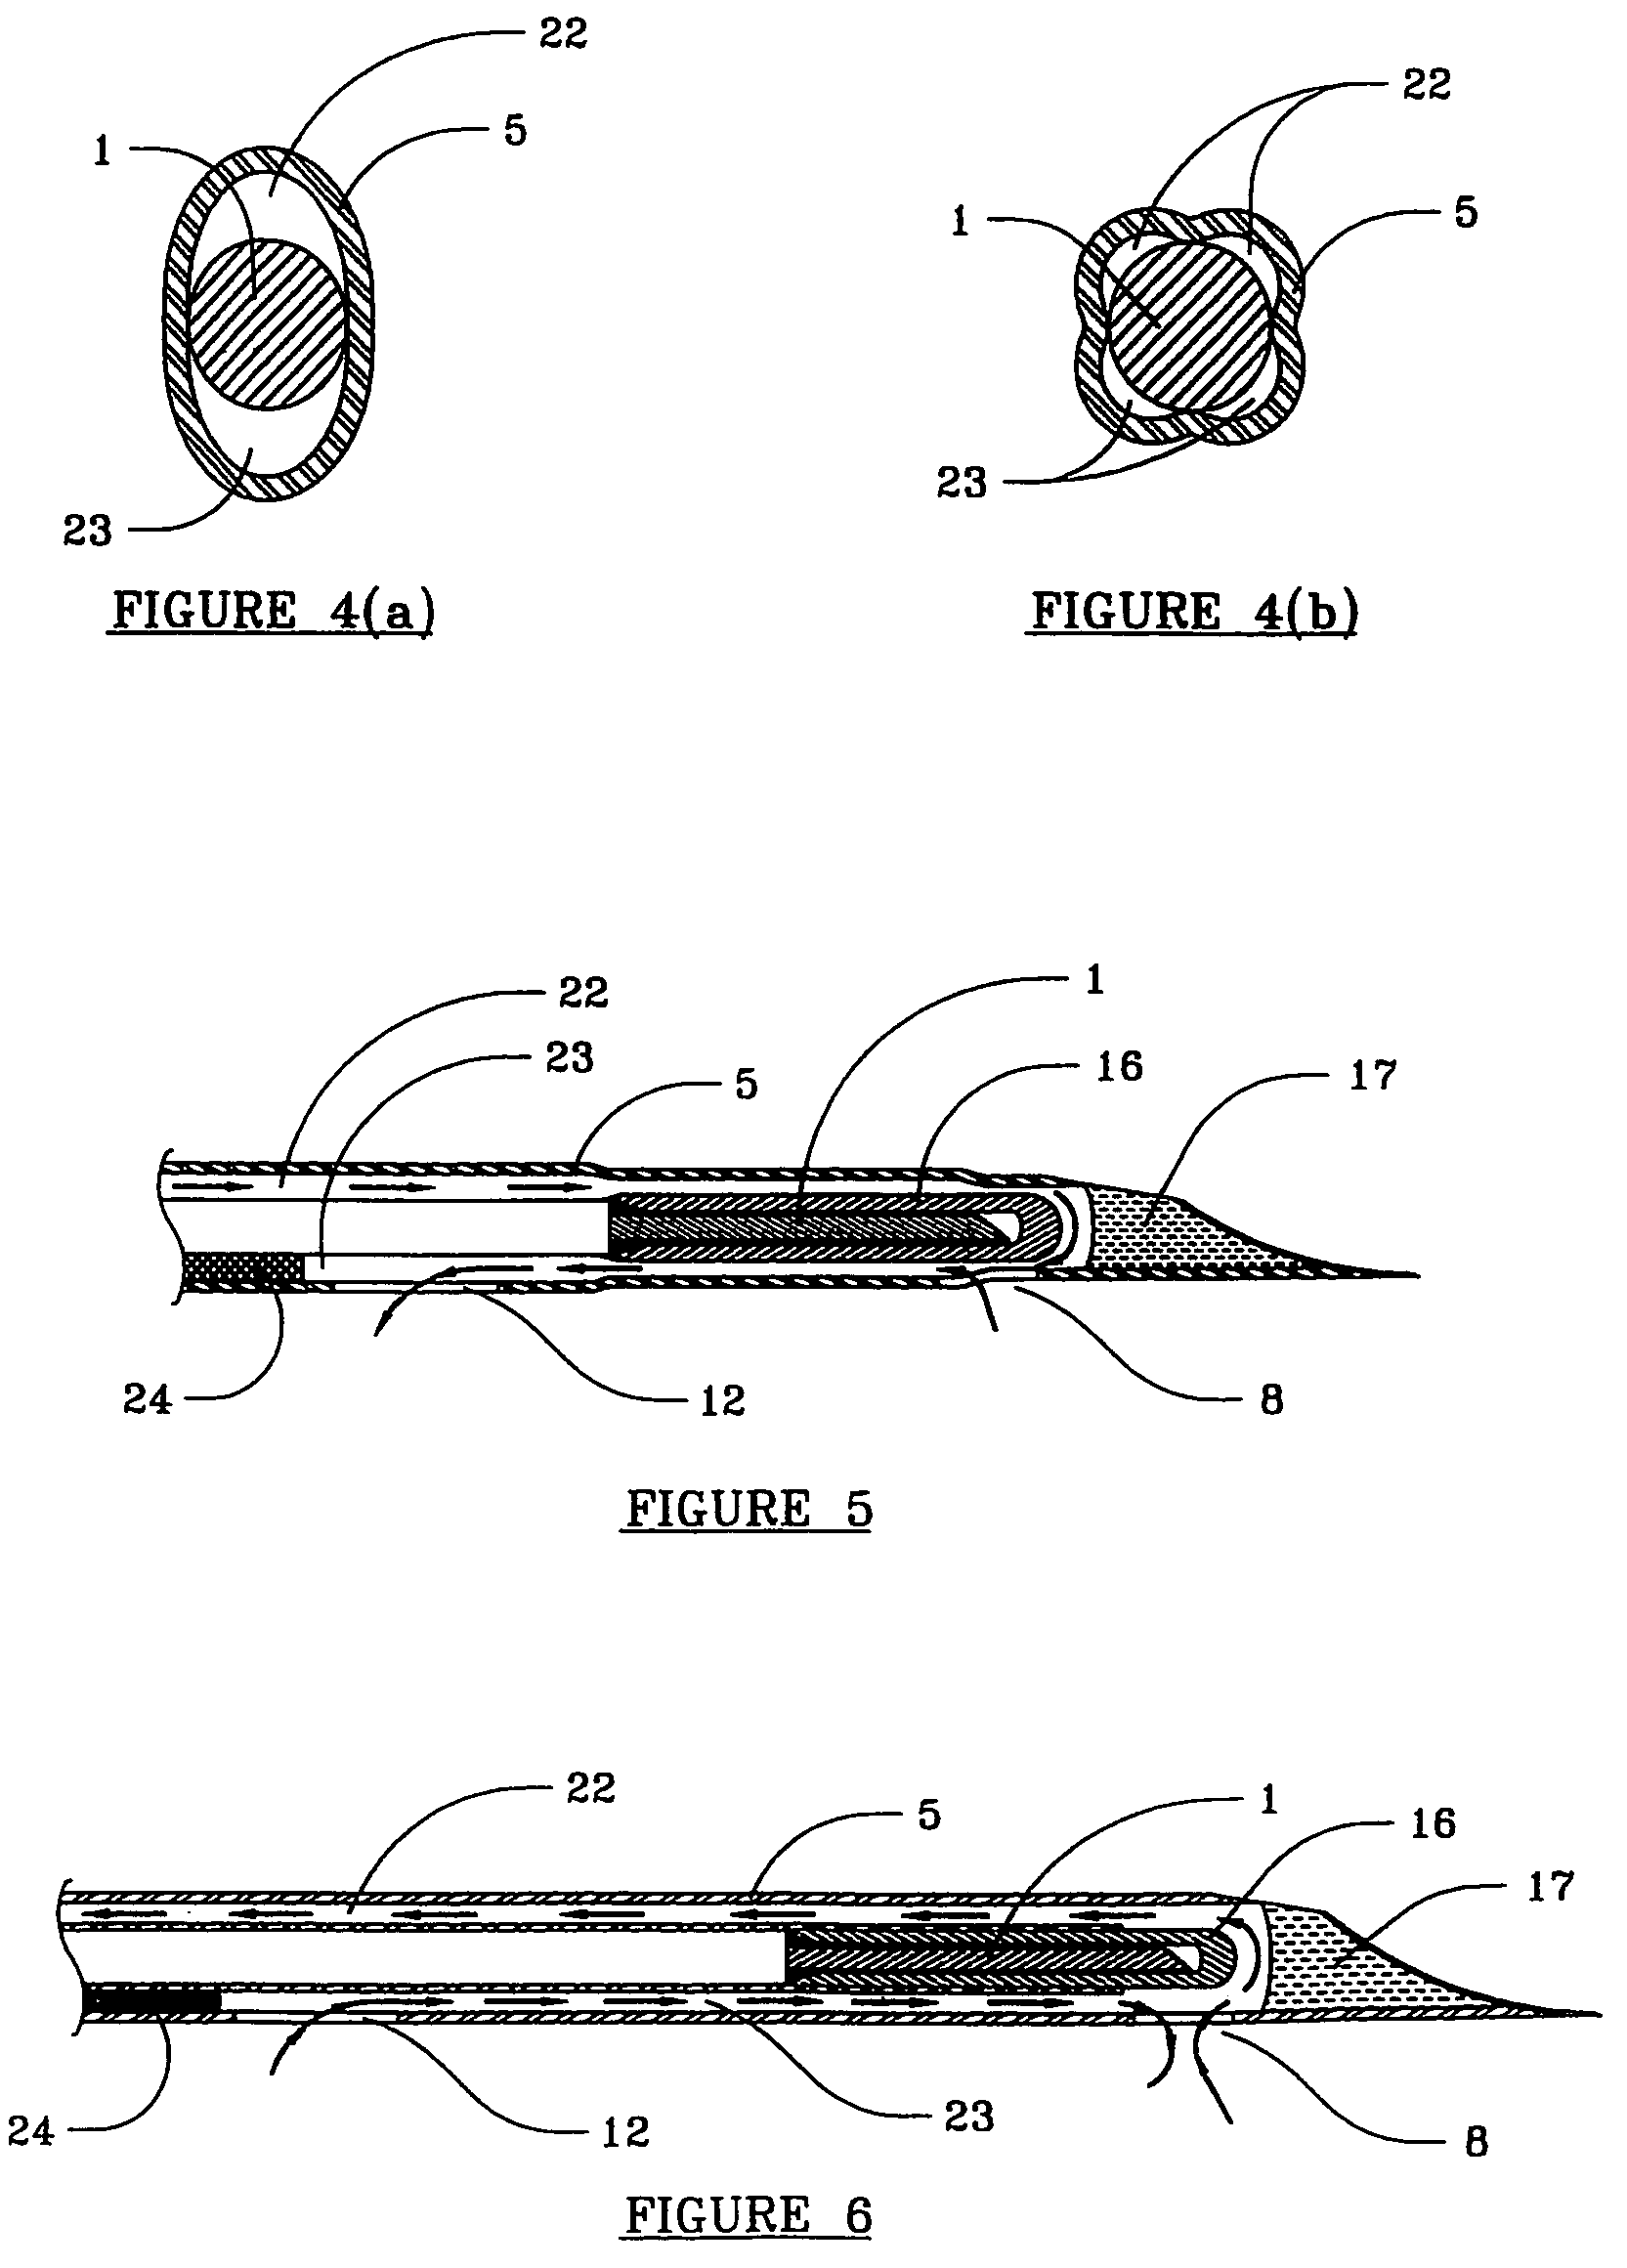 Devices and methods for directed, interstitial ablation of tissue